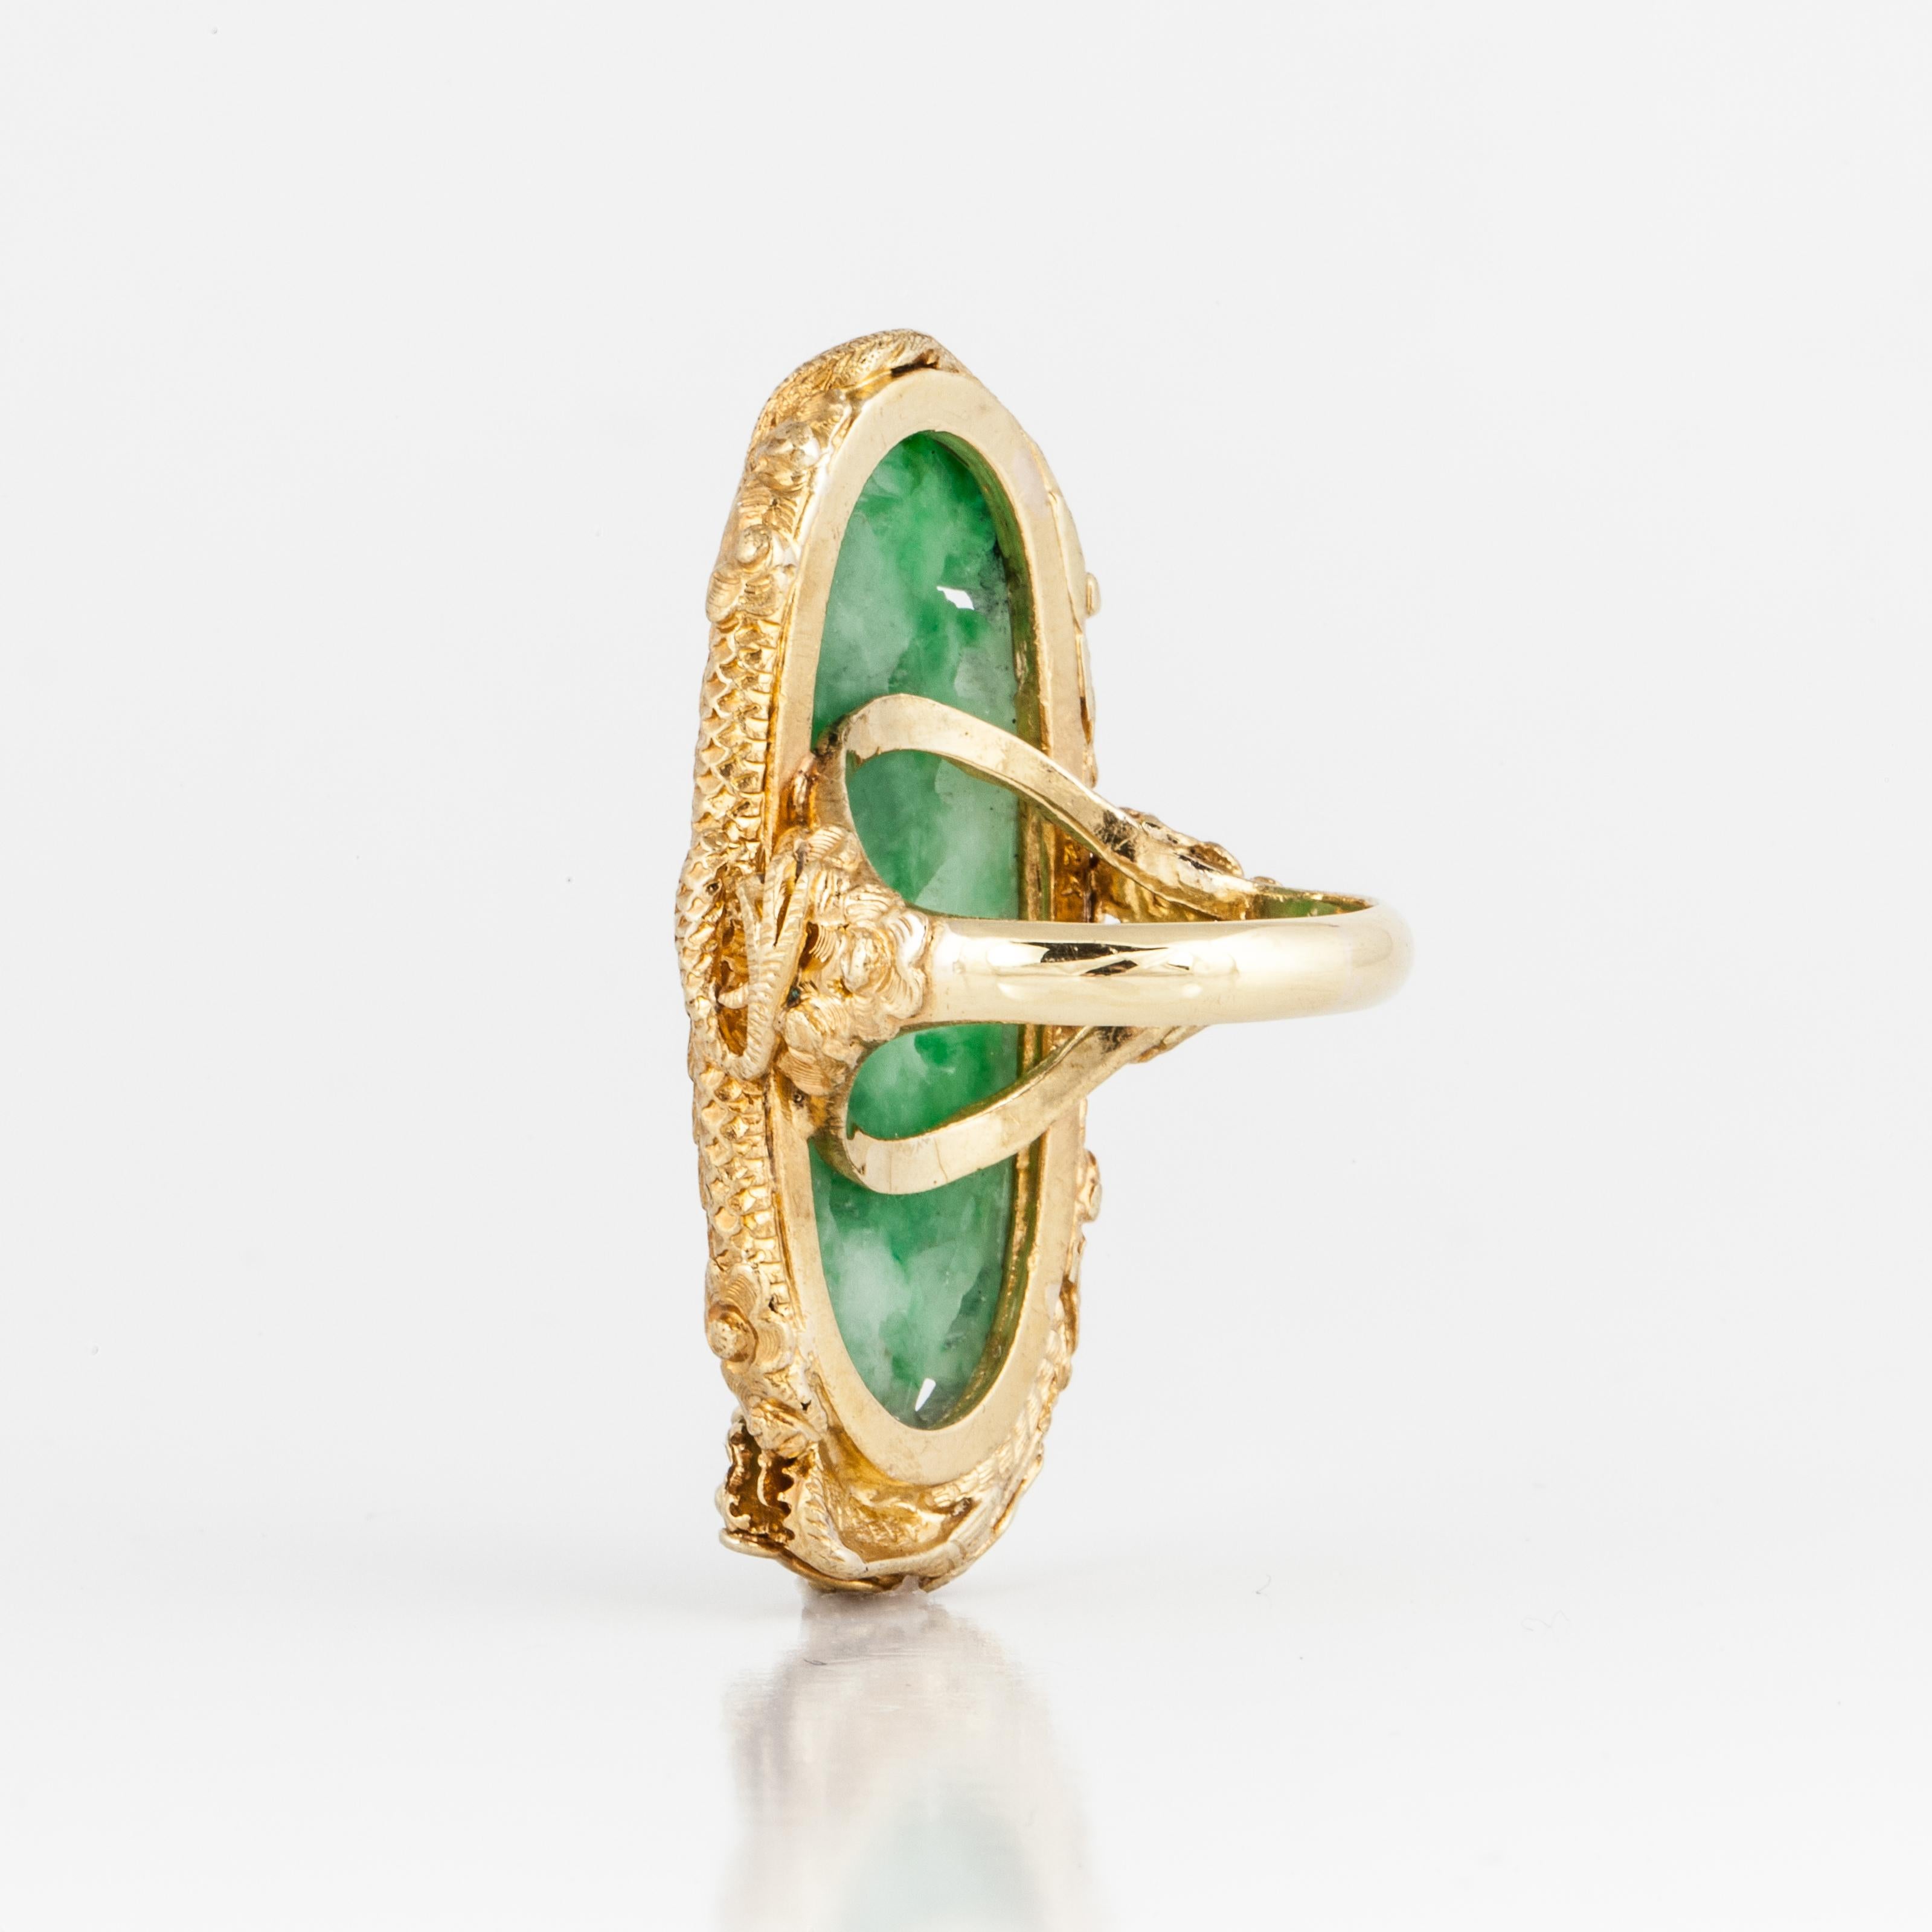 Mixed Cut Carved Jadeite Ring in 22K Gold